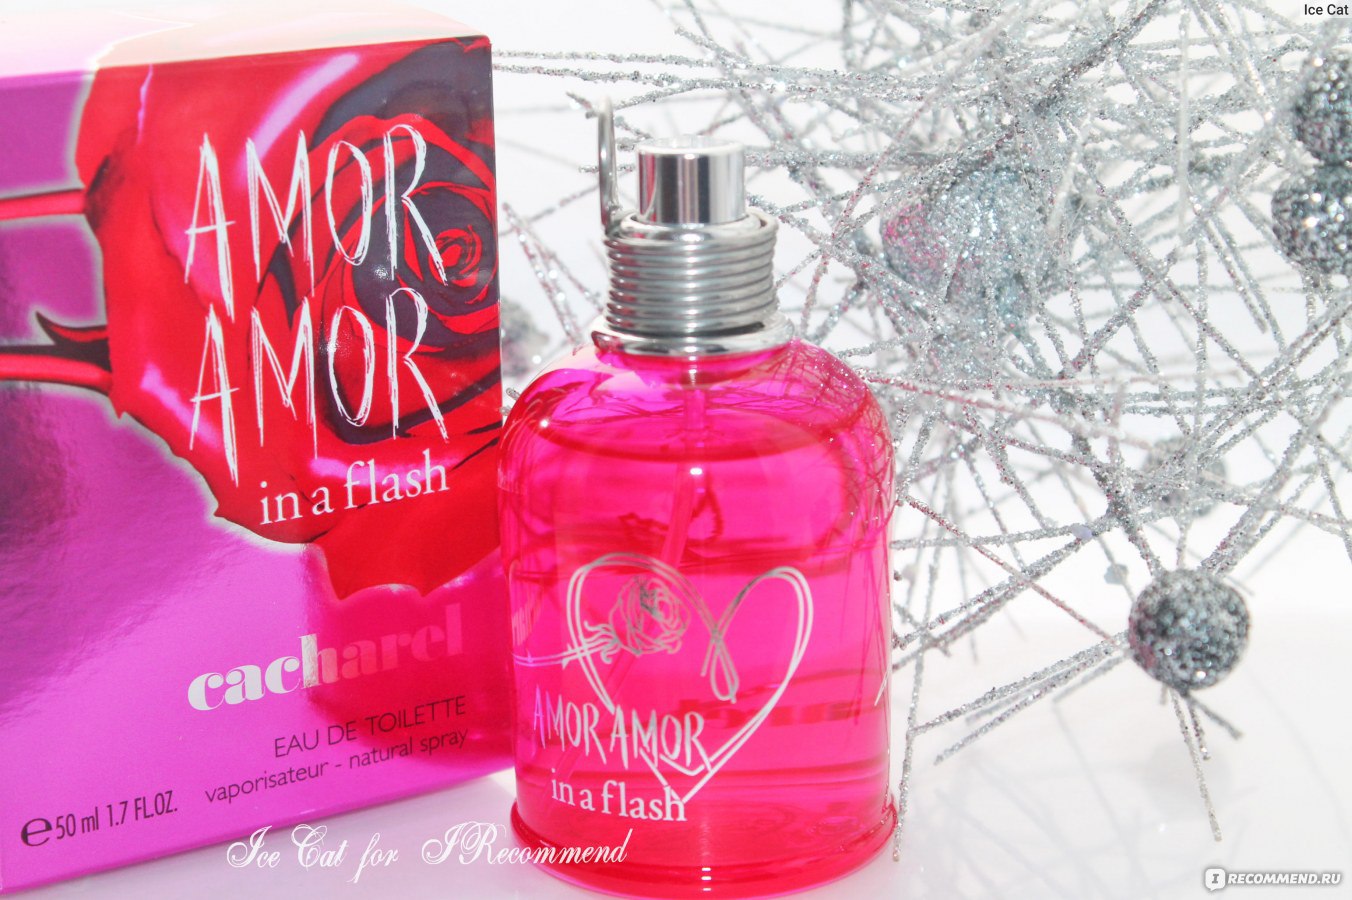 In amore divina. Амор Амор 50 мл. Cacharel Amor Amor EDT 50ml w. Amore Amore духи Cacharel. Cacharel Amor Amor 30ml EDT.